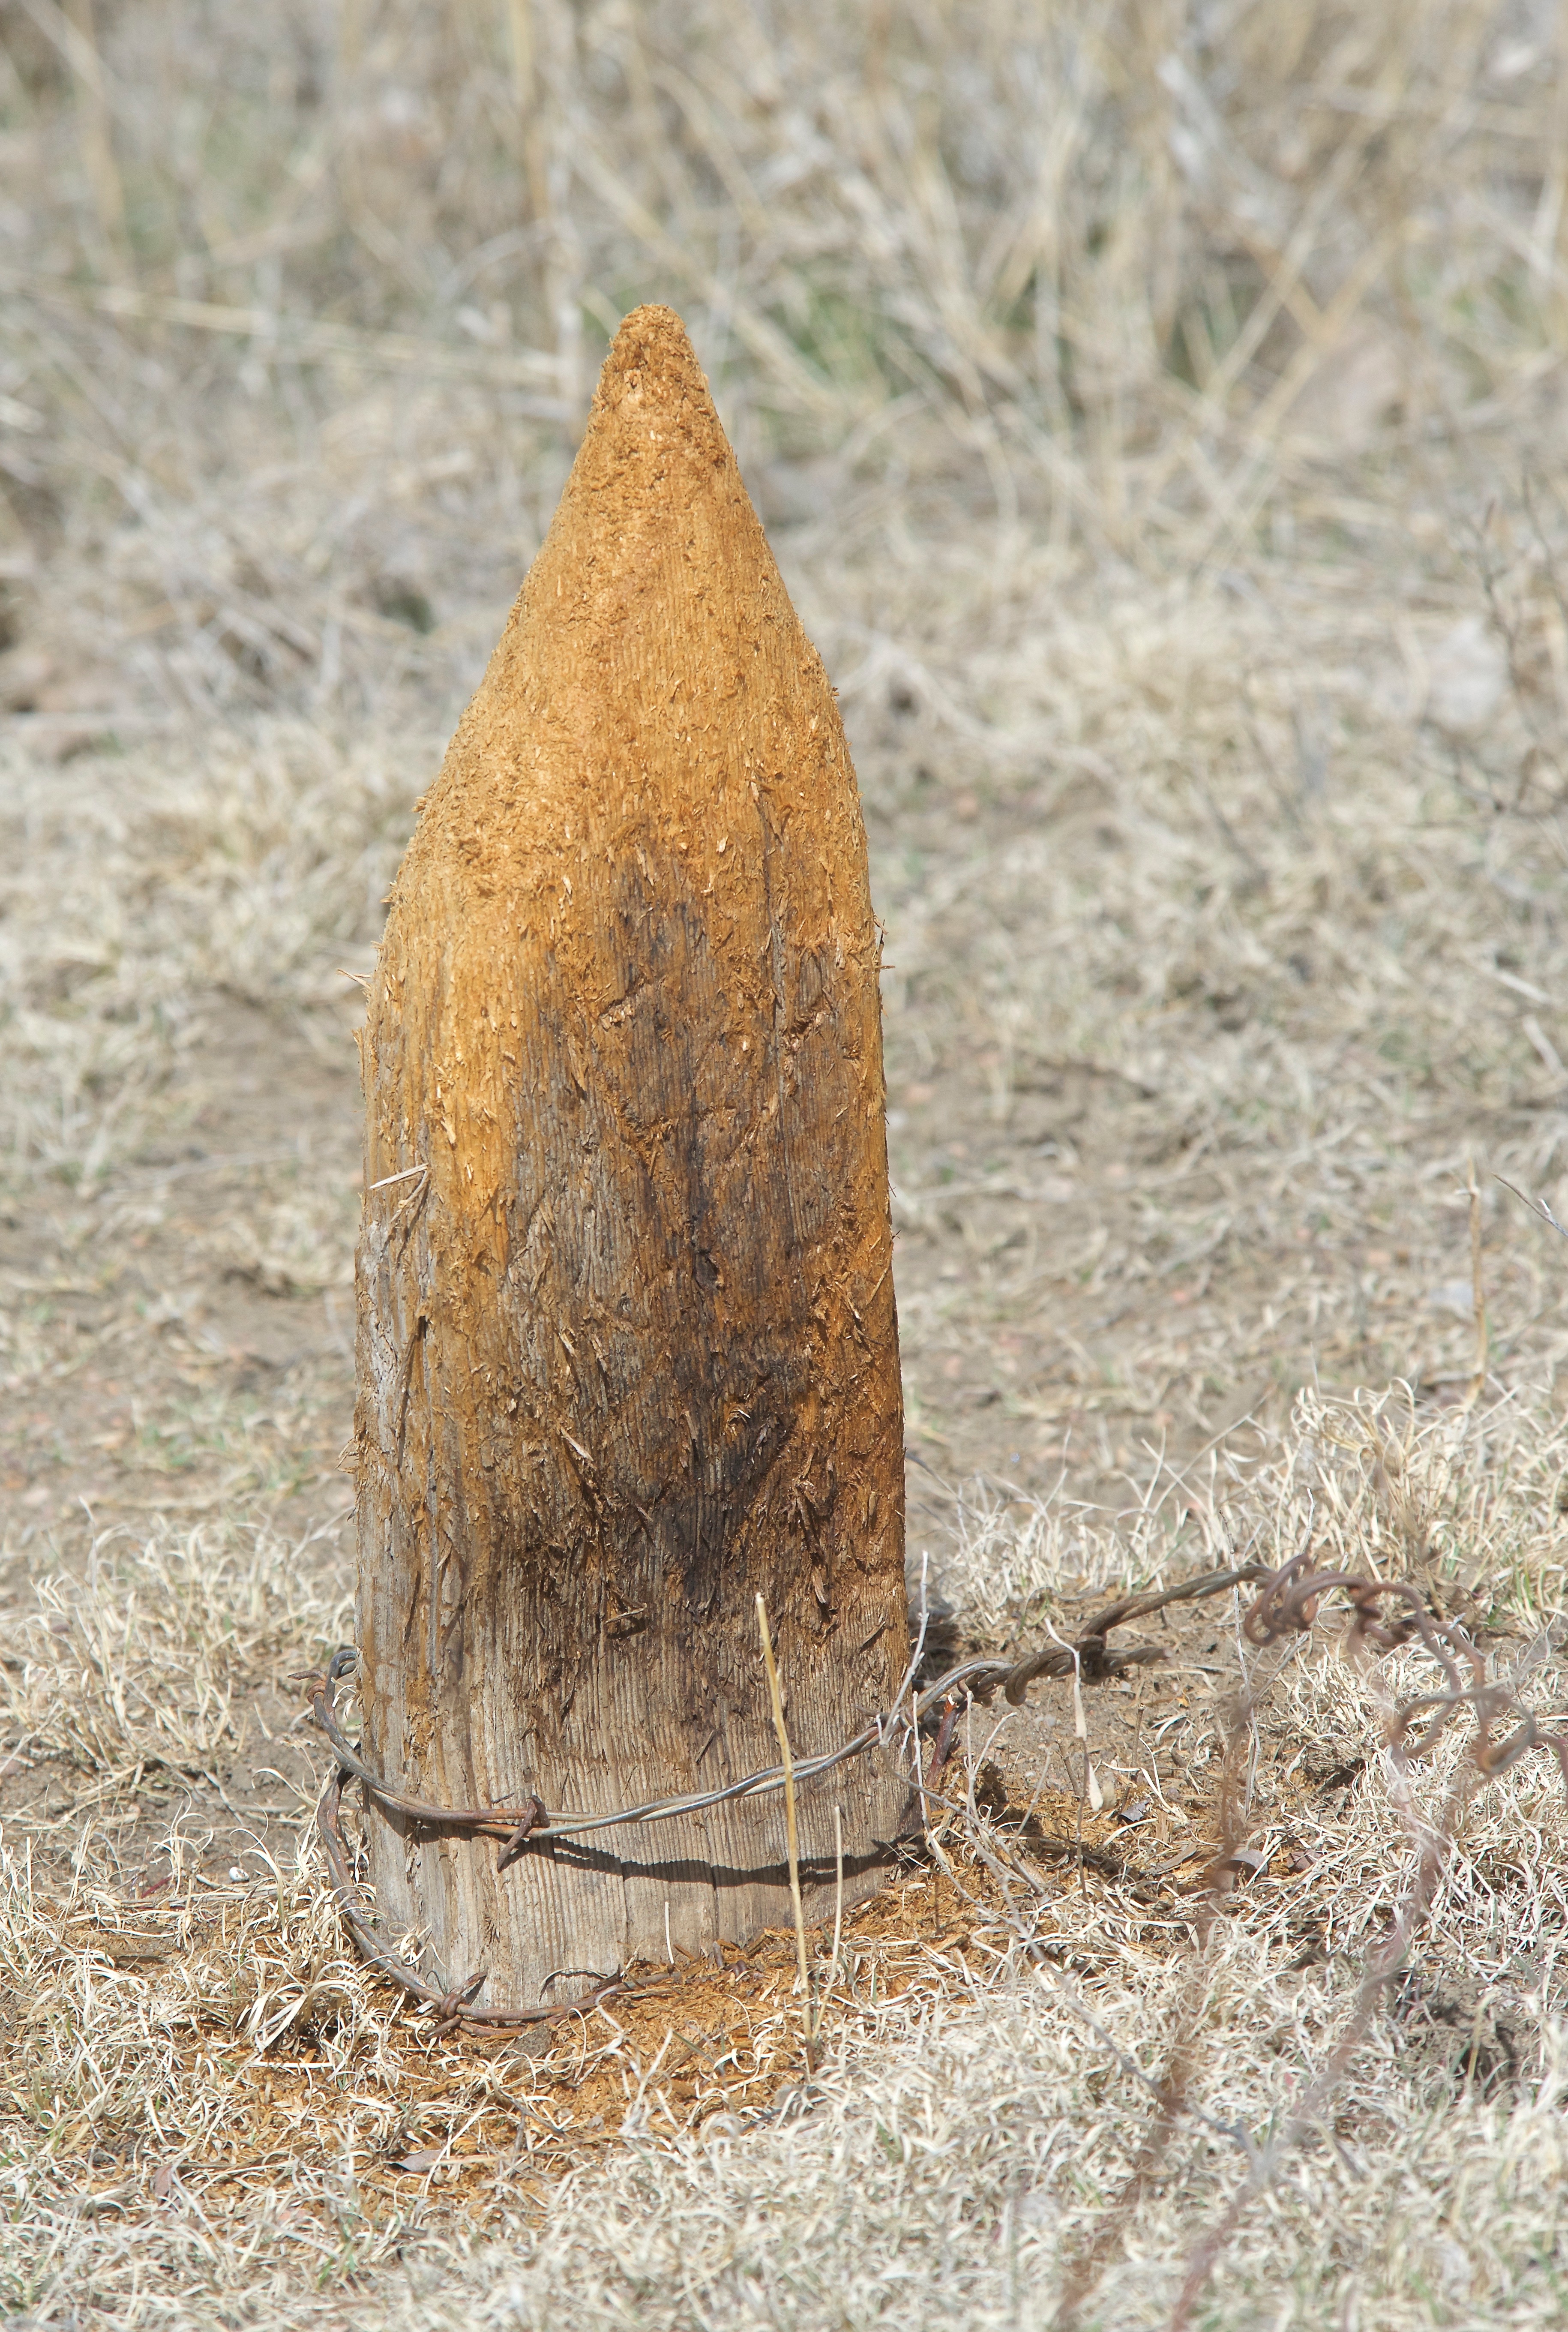 Fence Post Sharpened to a Nubbing by Deer